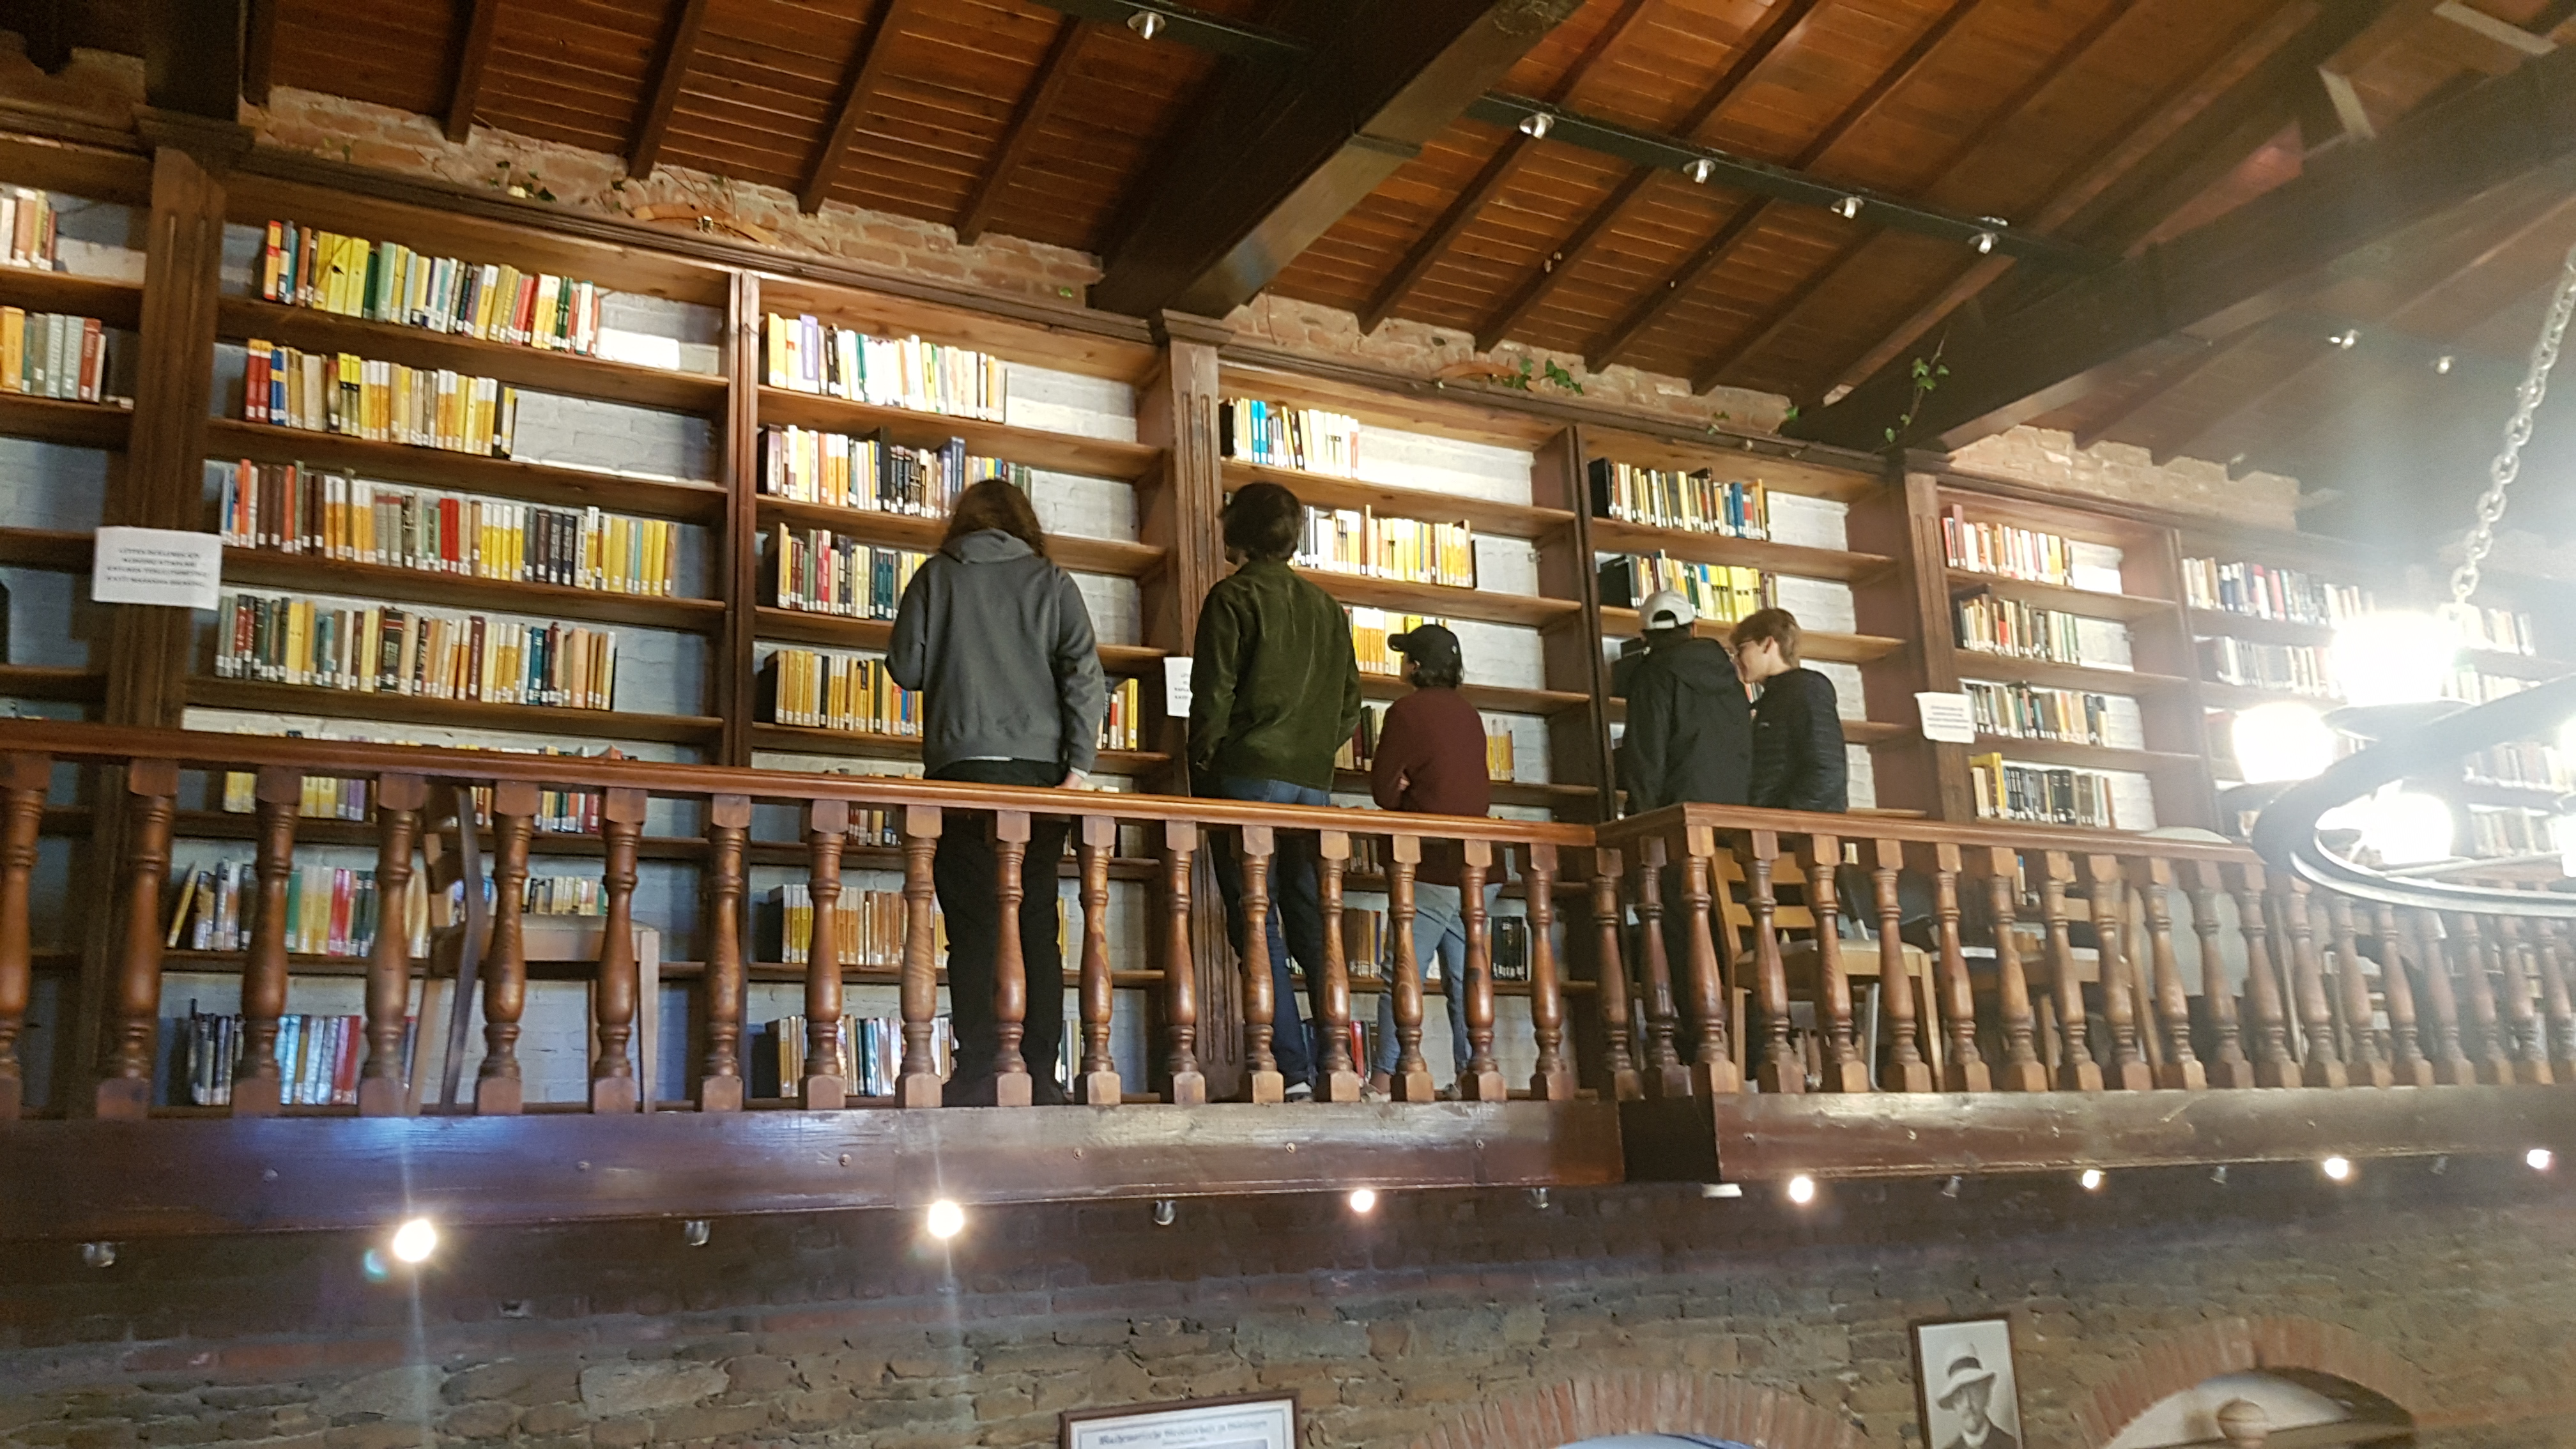 Checking out the math library of the Village